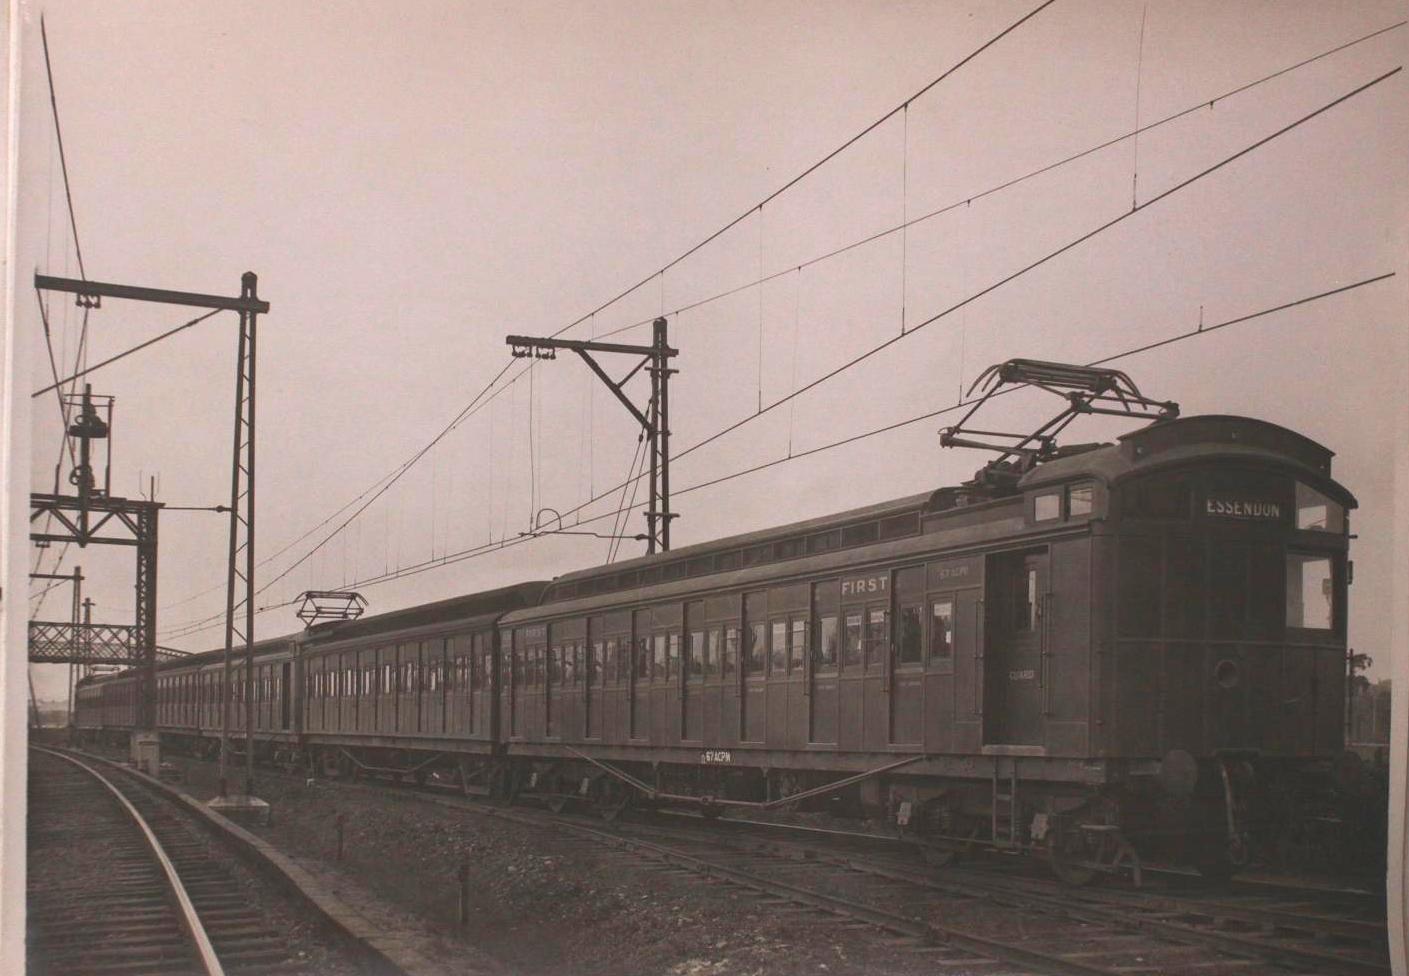 Image of a train 